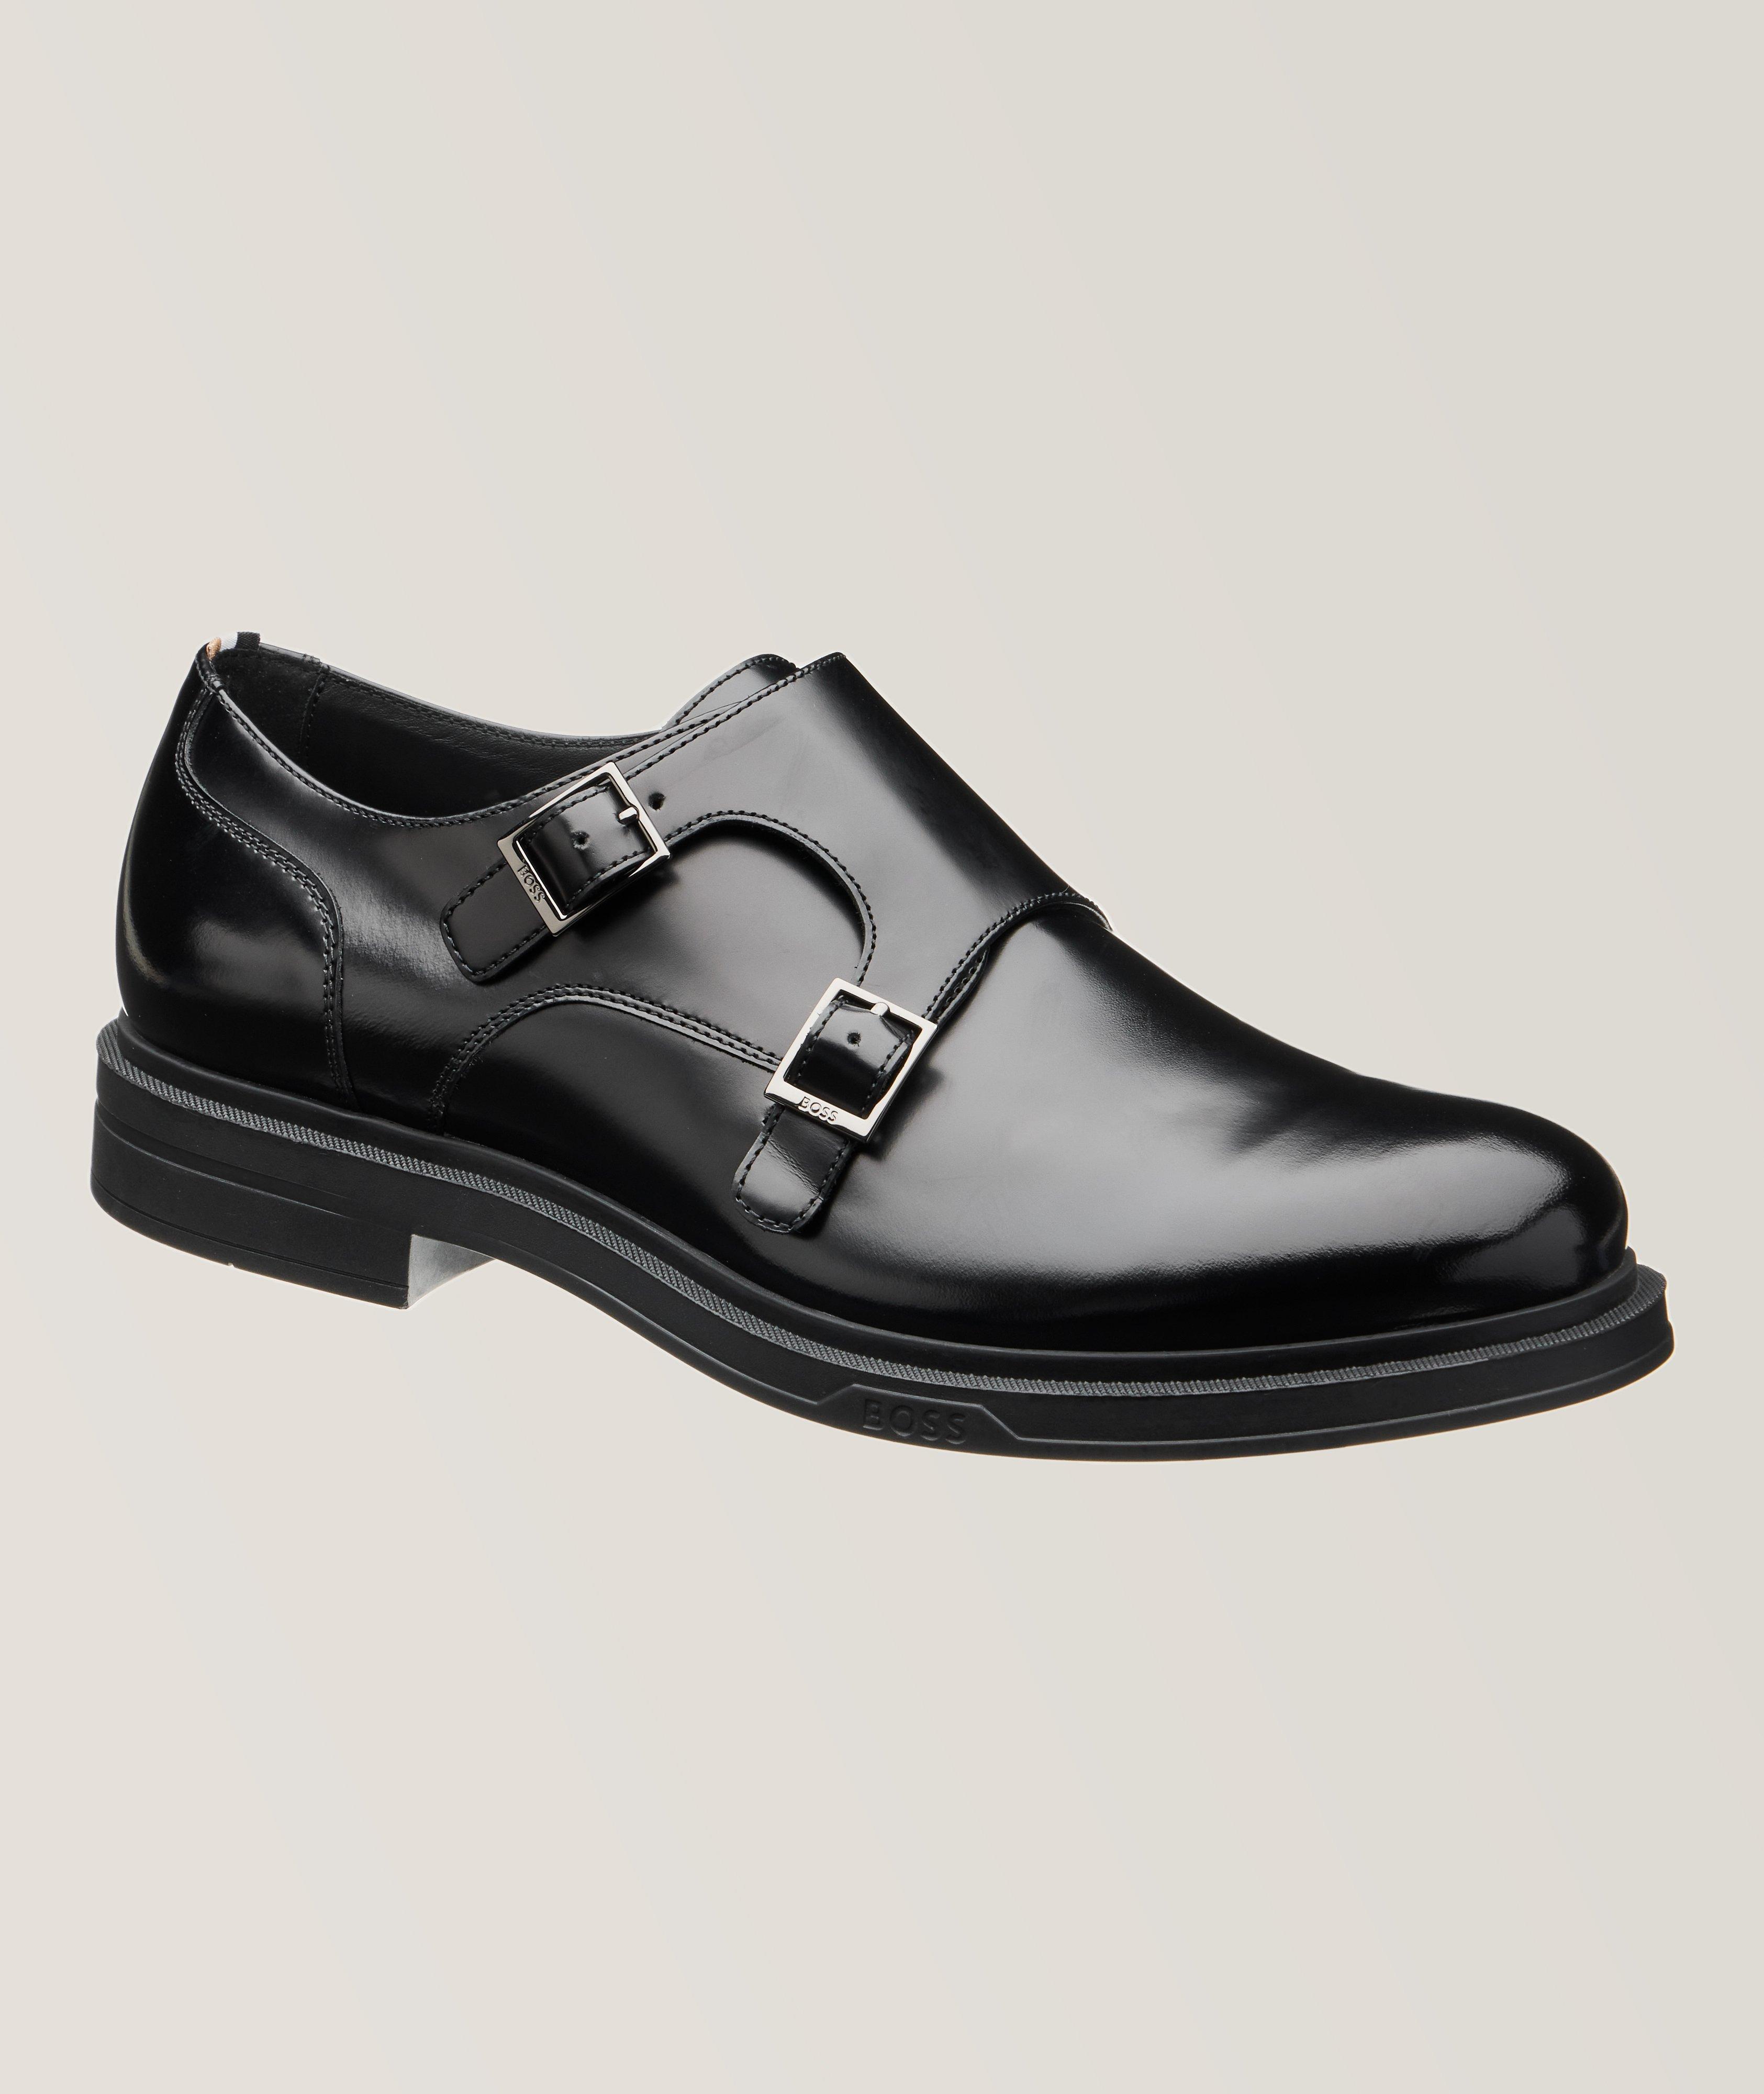 Polished Leather Elkan Double Monk Straps